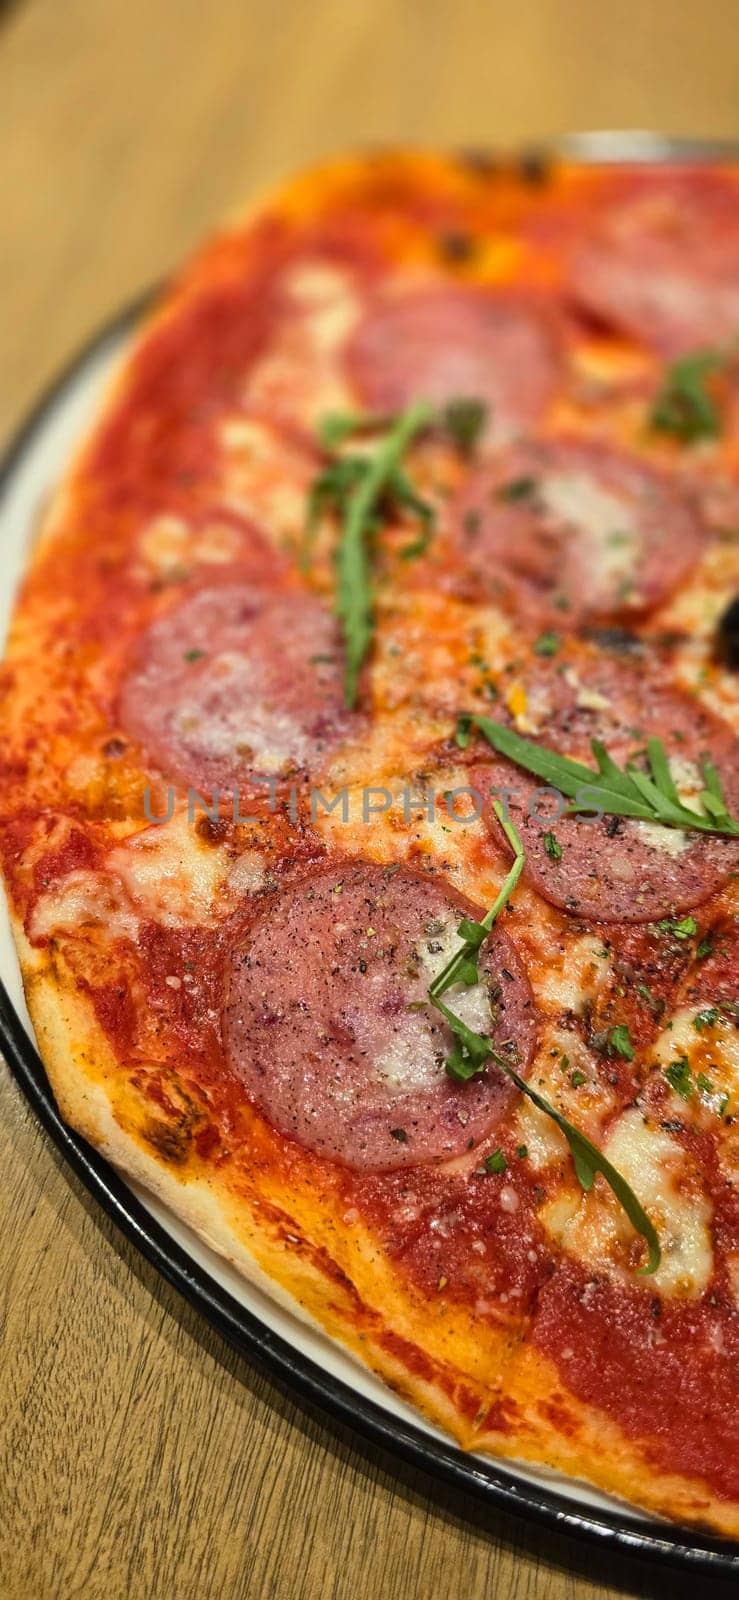 Freshly baked New York style pizza with melted mozzarella cheese and base tomato sauce with lots of pepperoni by antoksena